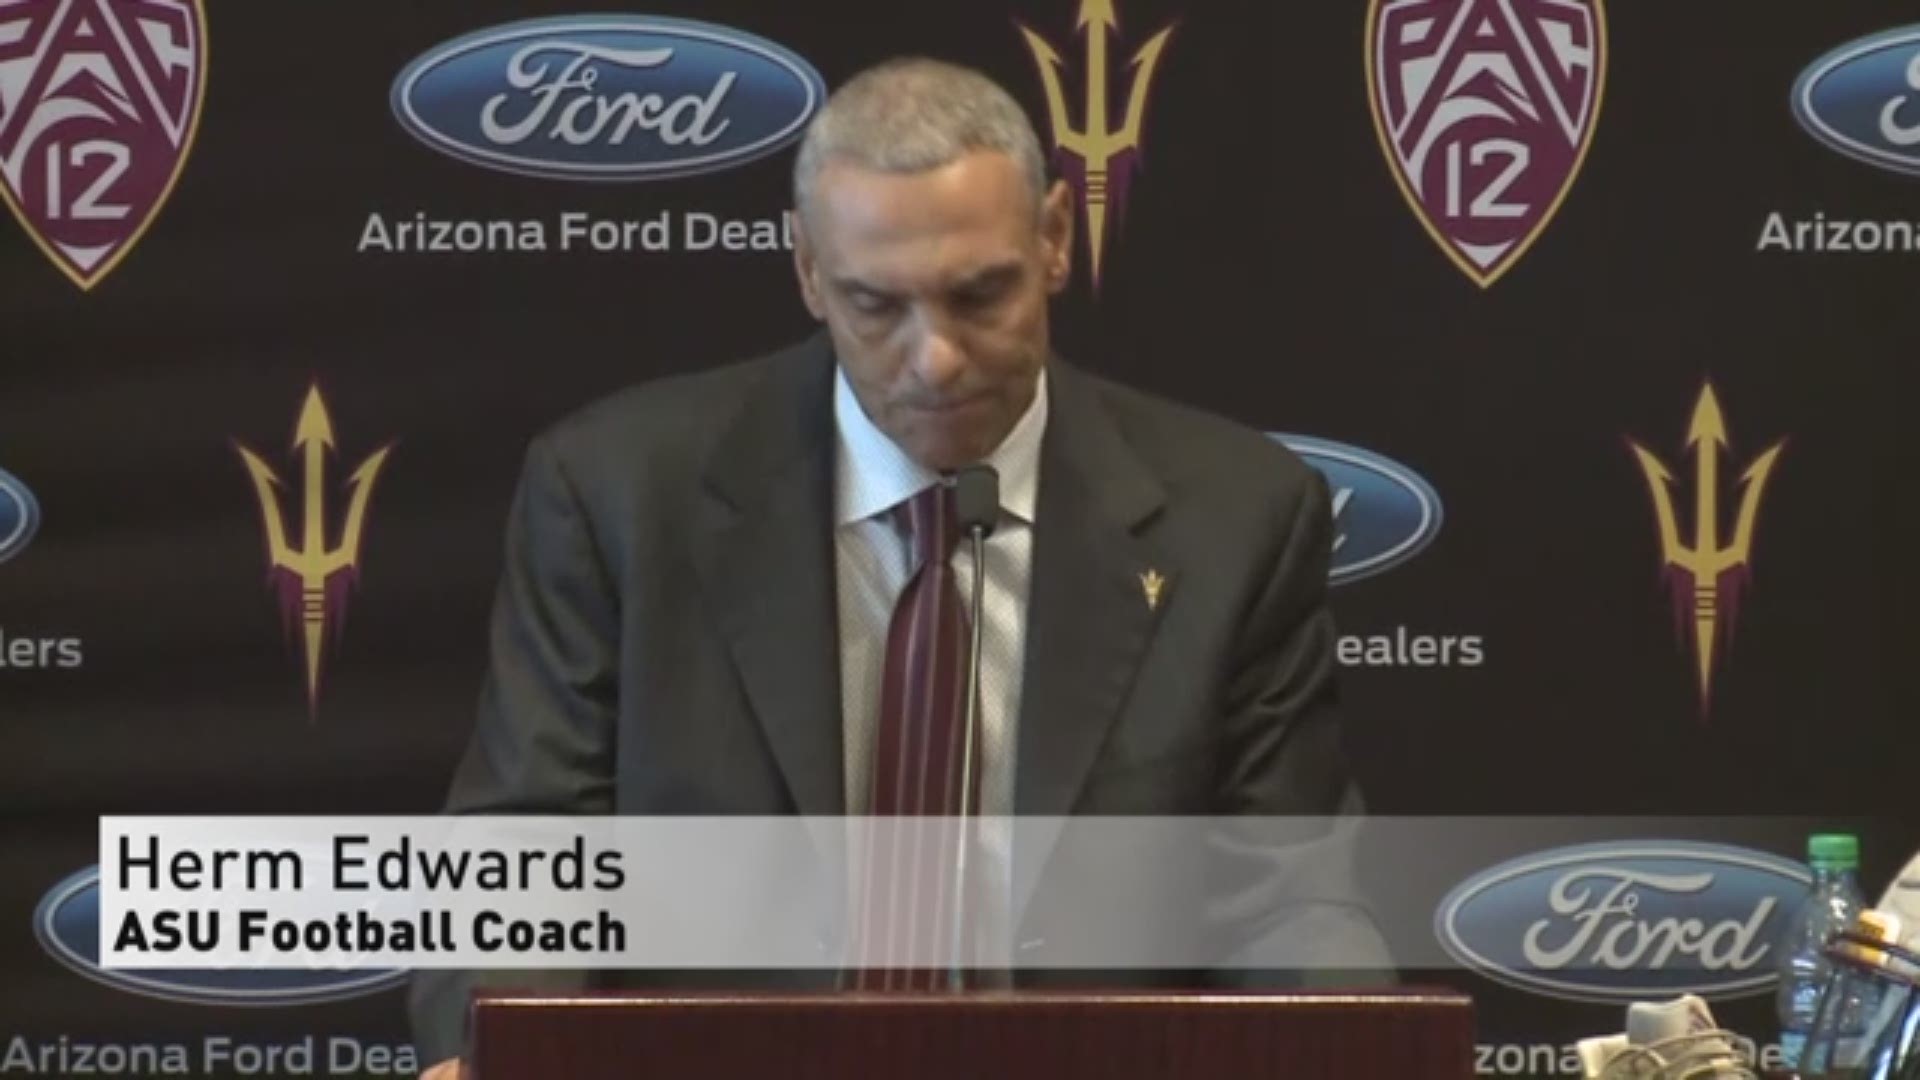 Full video: New ASU head football coach Herm Edwards talked to media about his new role and commitment to Sun Devils.